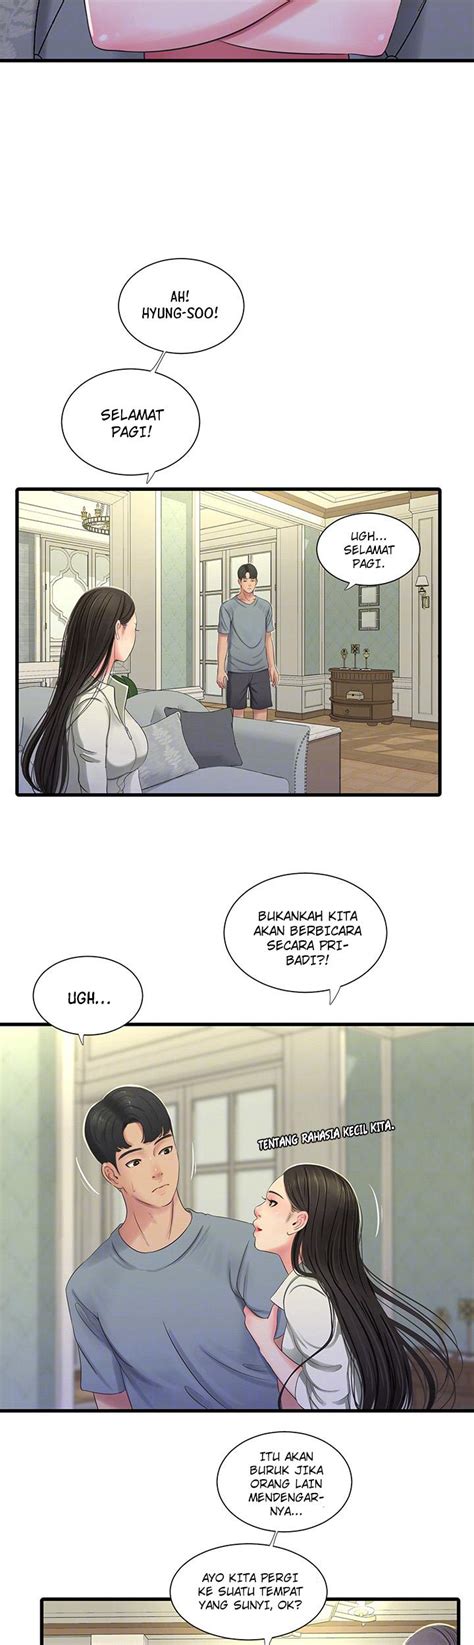 Manhwa 18 sub. One's in-Laws Virgins манхва. Baca manhwa 18. Manhwa 18 Bahasa Indonesia. Manhwa 18 sub Indonesia.